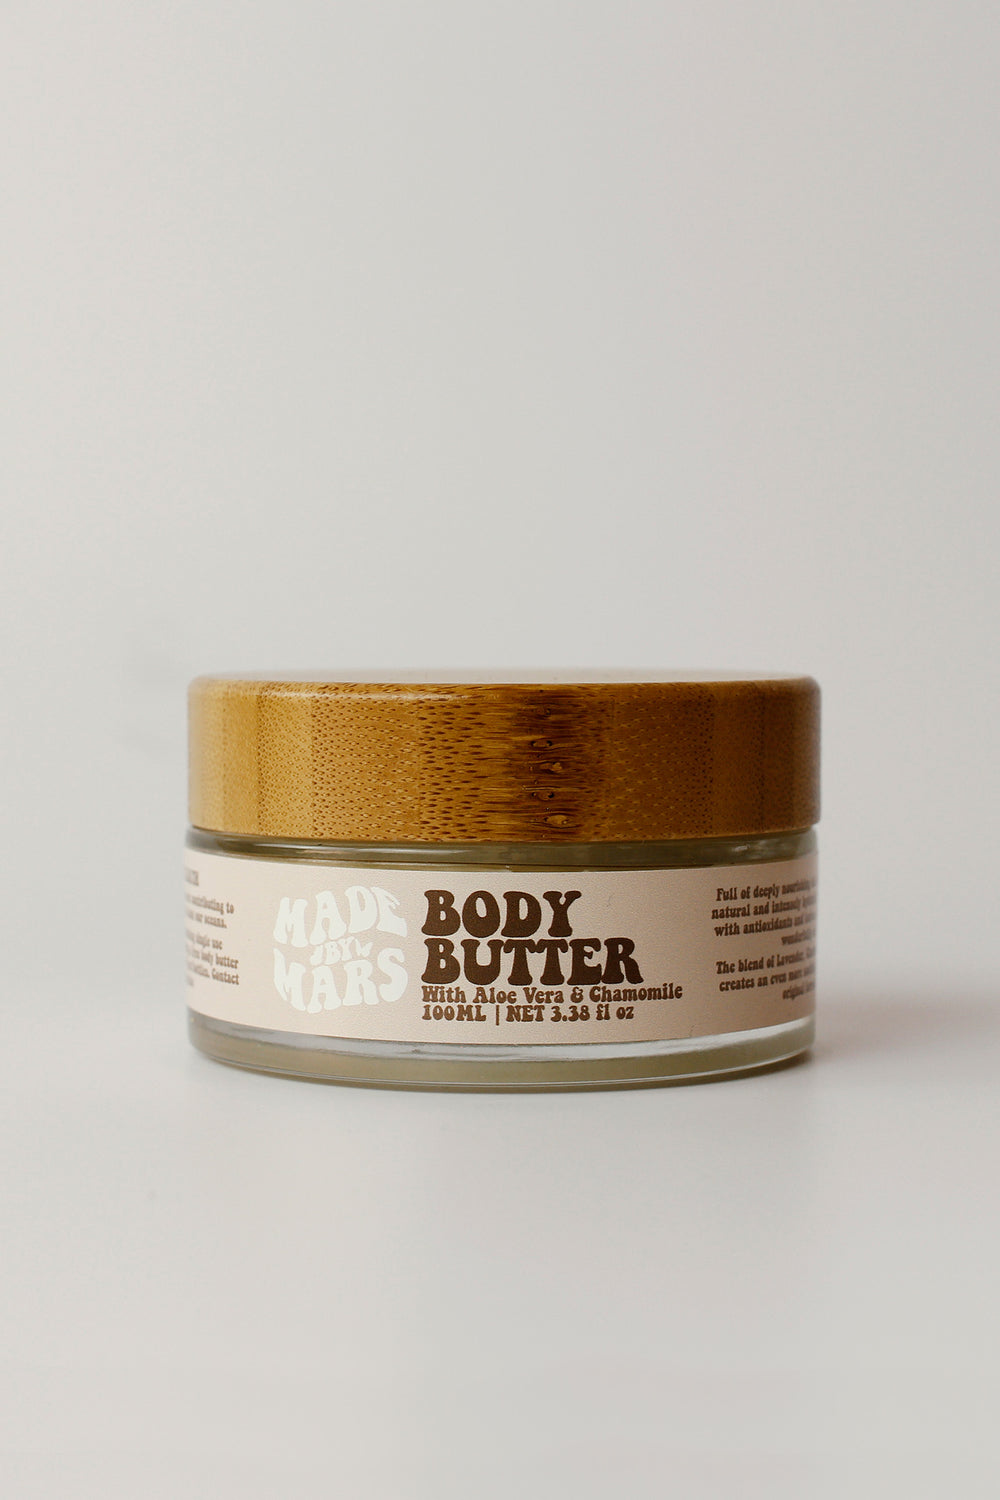 Made by Marts Aloe Vera Body Butter 100ml